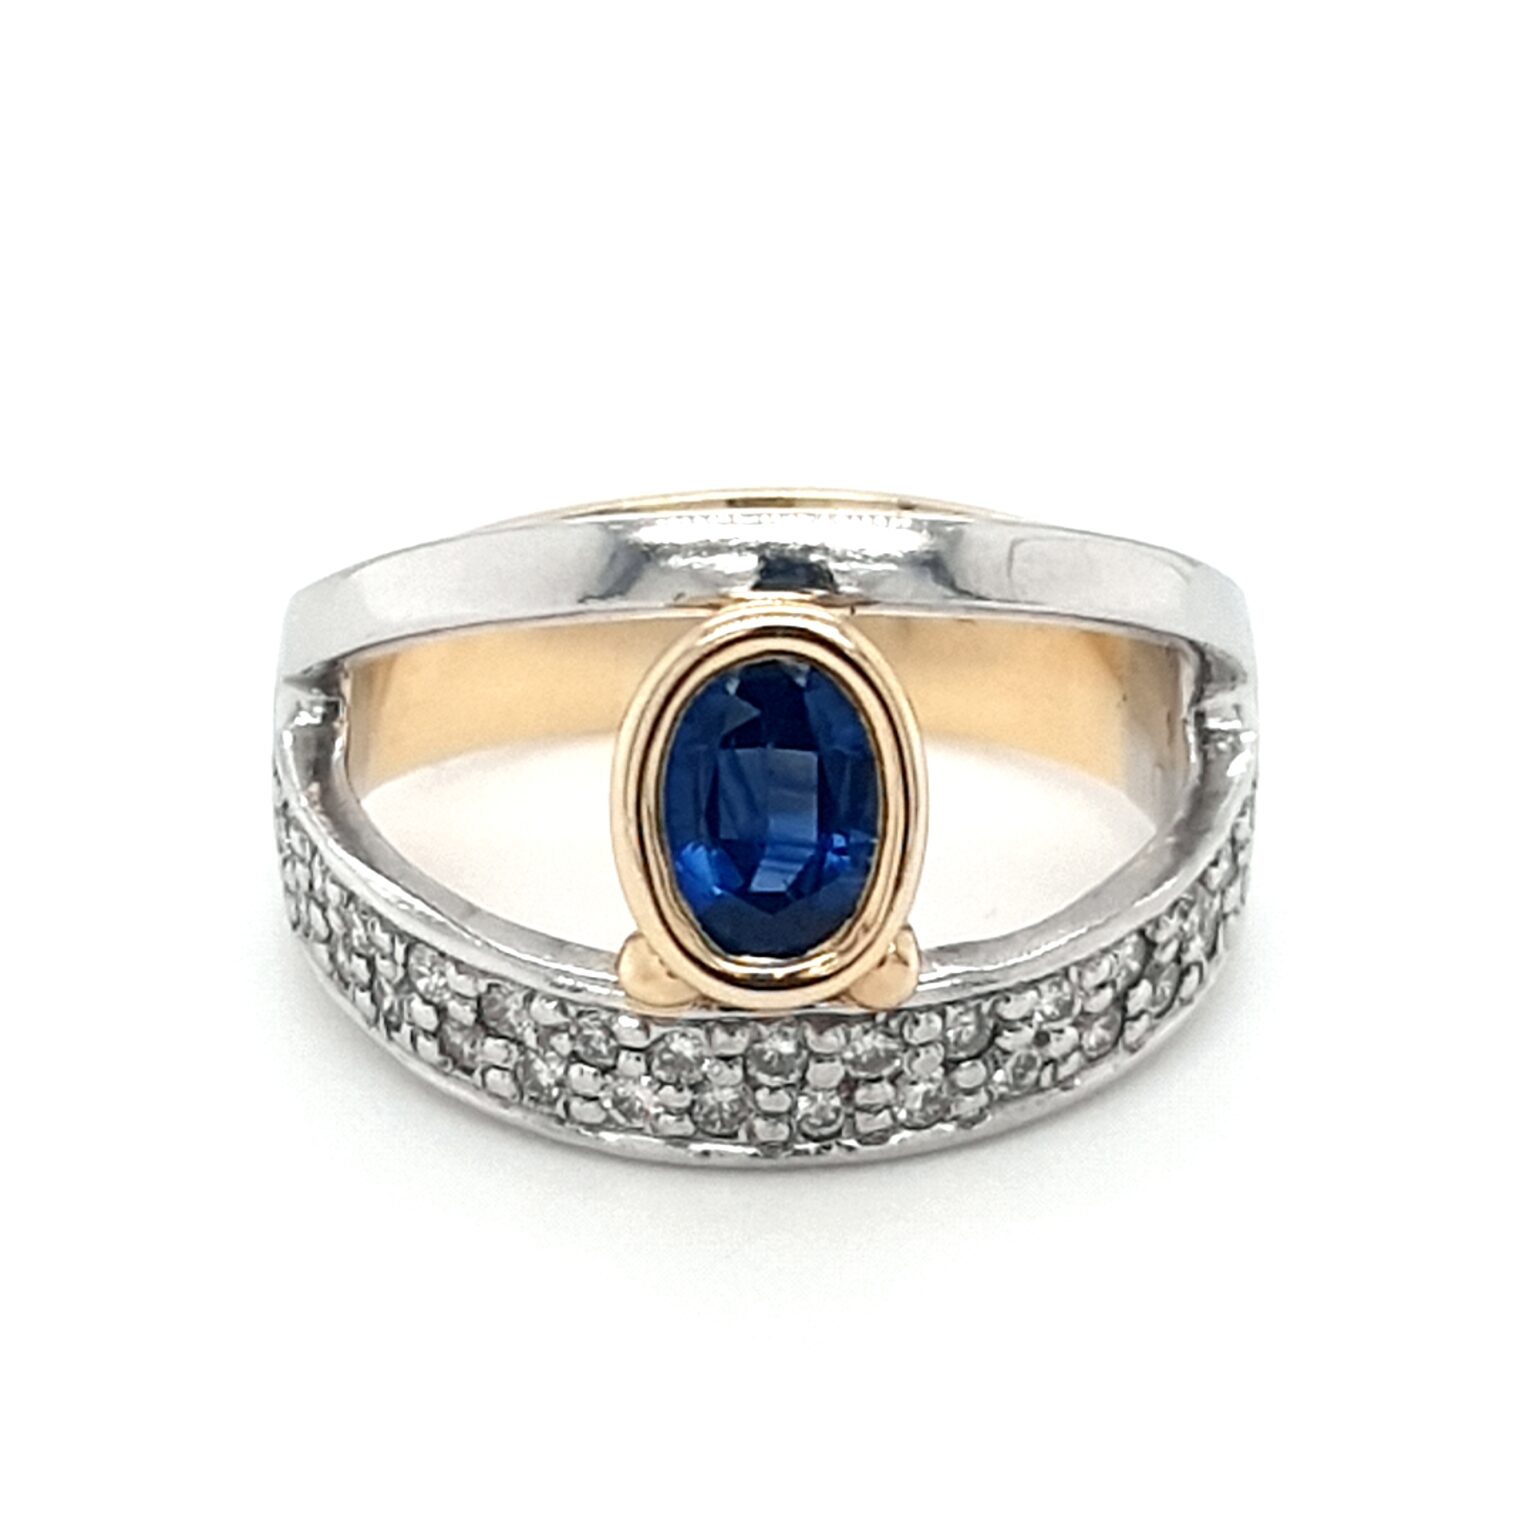 Leon Baker 18K Yellow and White Gold Blue Sapphire Ring_0